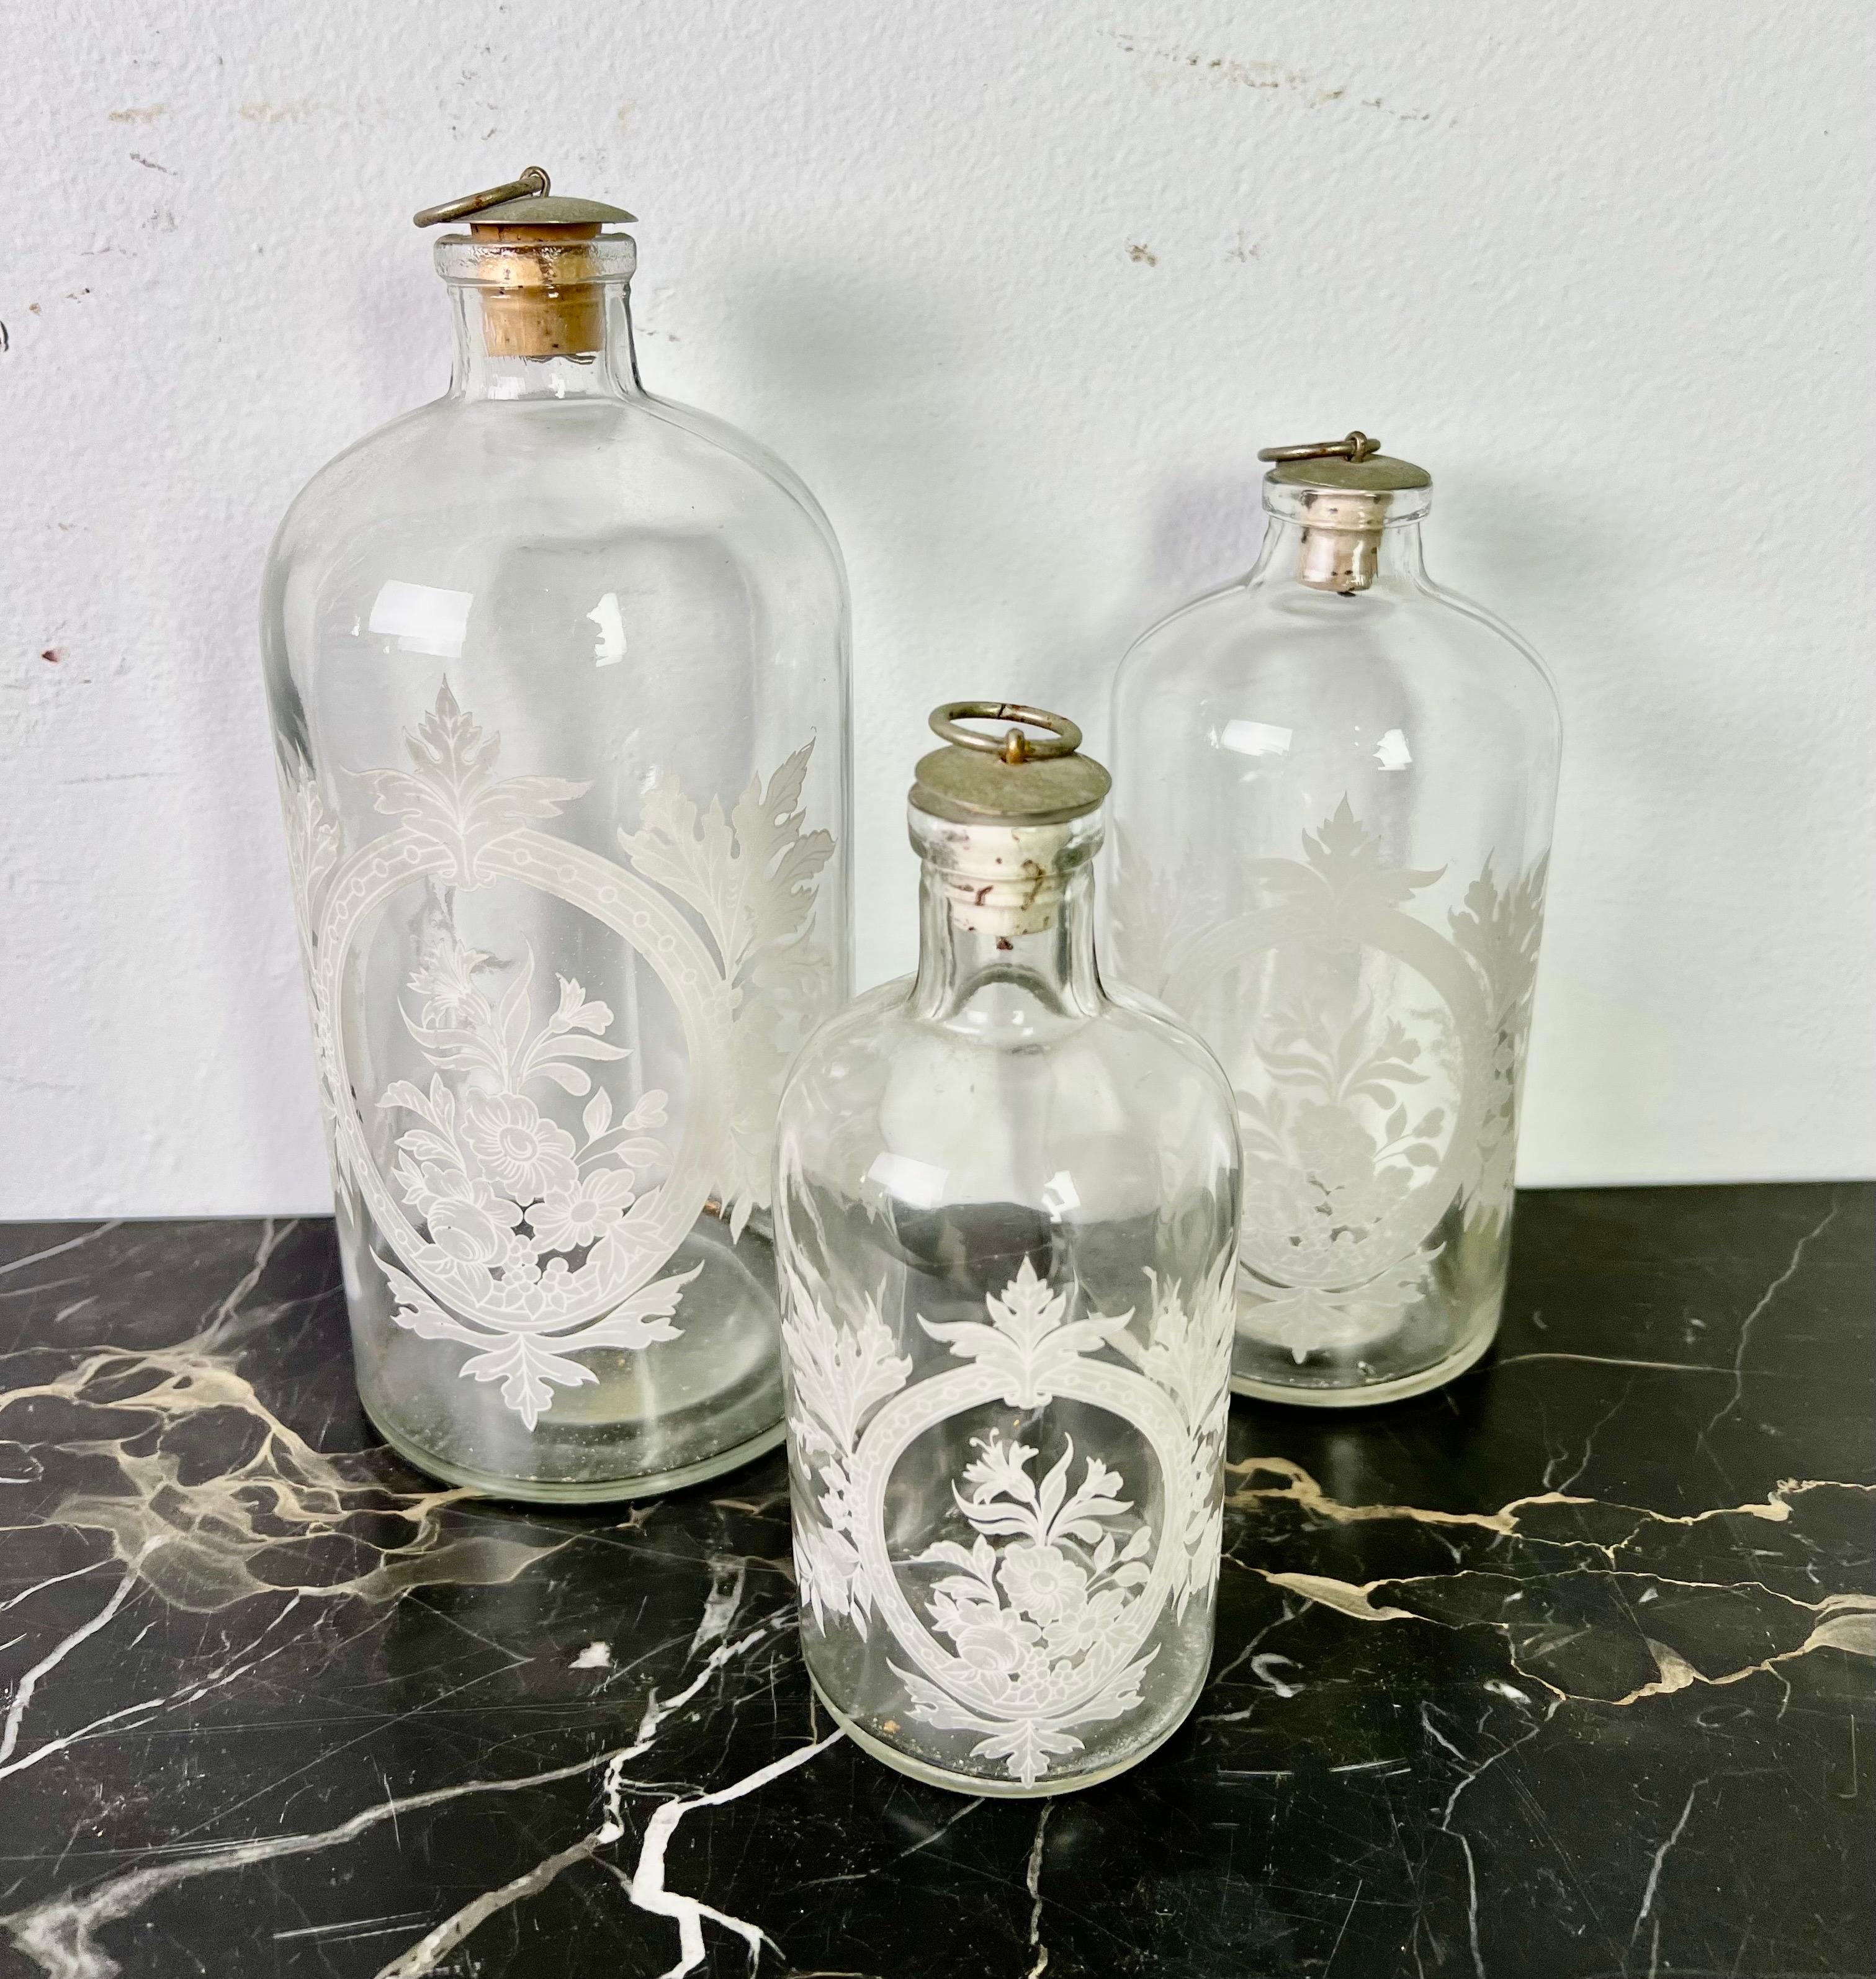 Set of (3) vanity bottles with cork tops. The bottles are etched with beautiful white flowers throughout. There are three different sizes:

Large-8.5